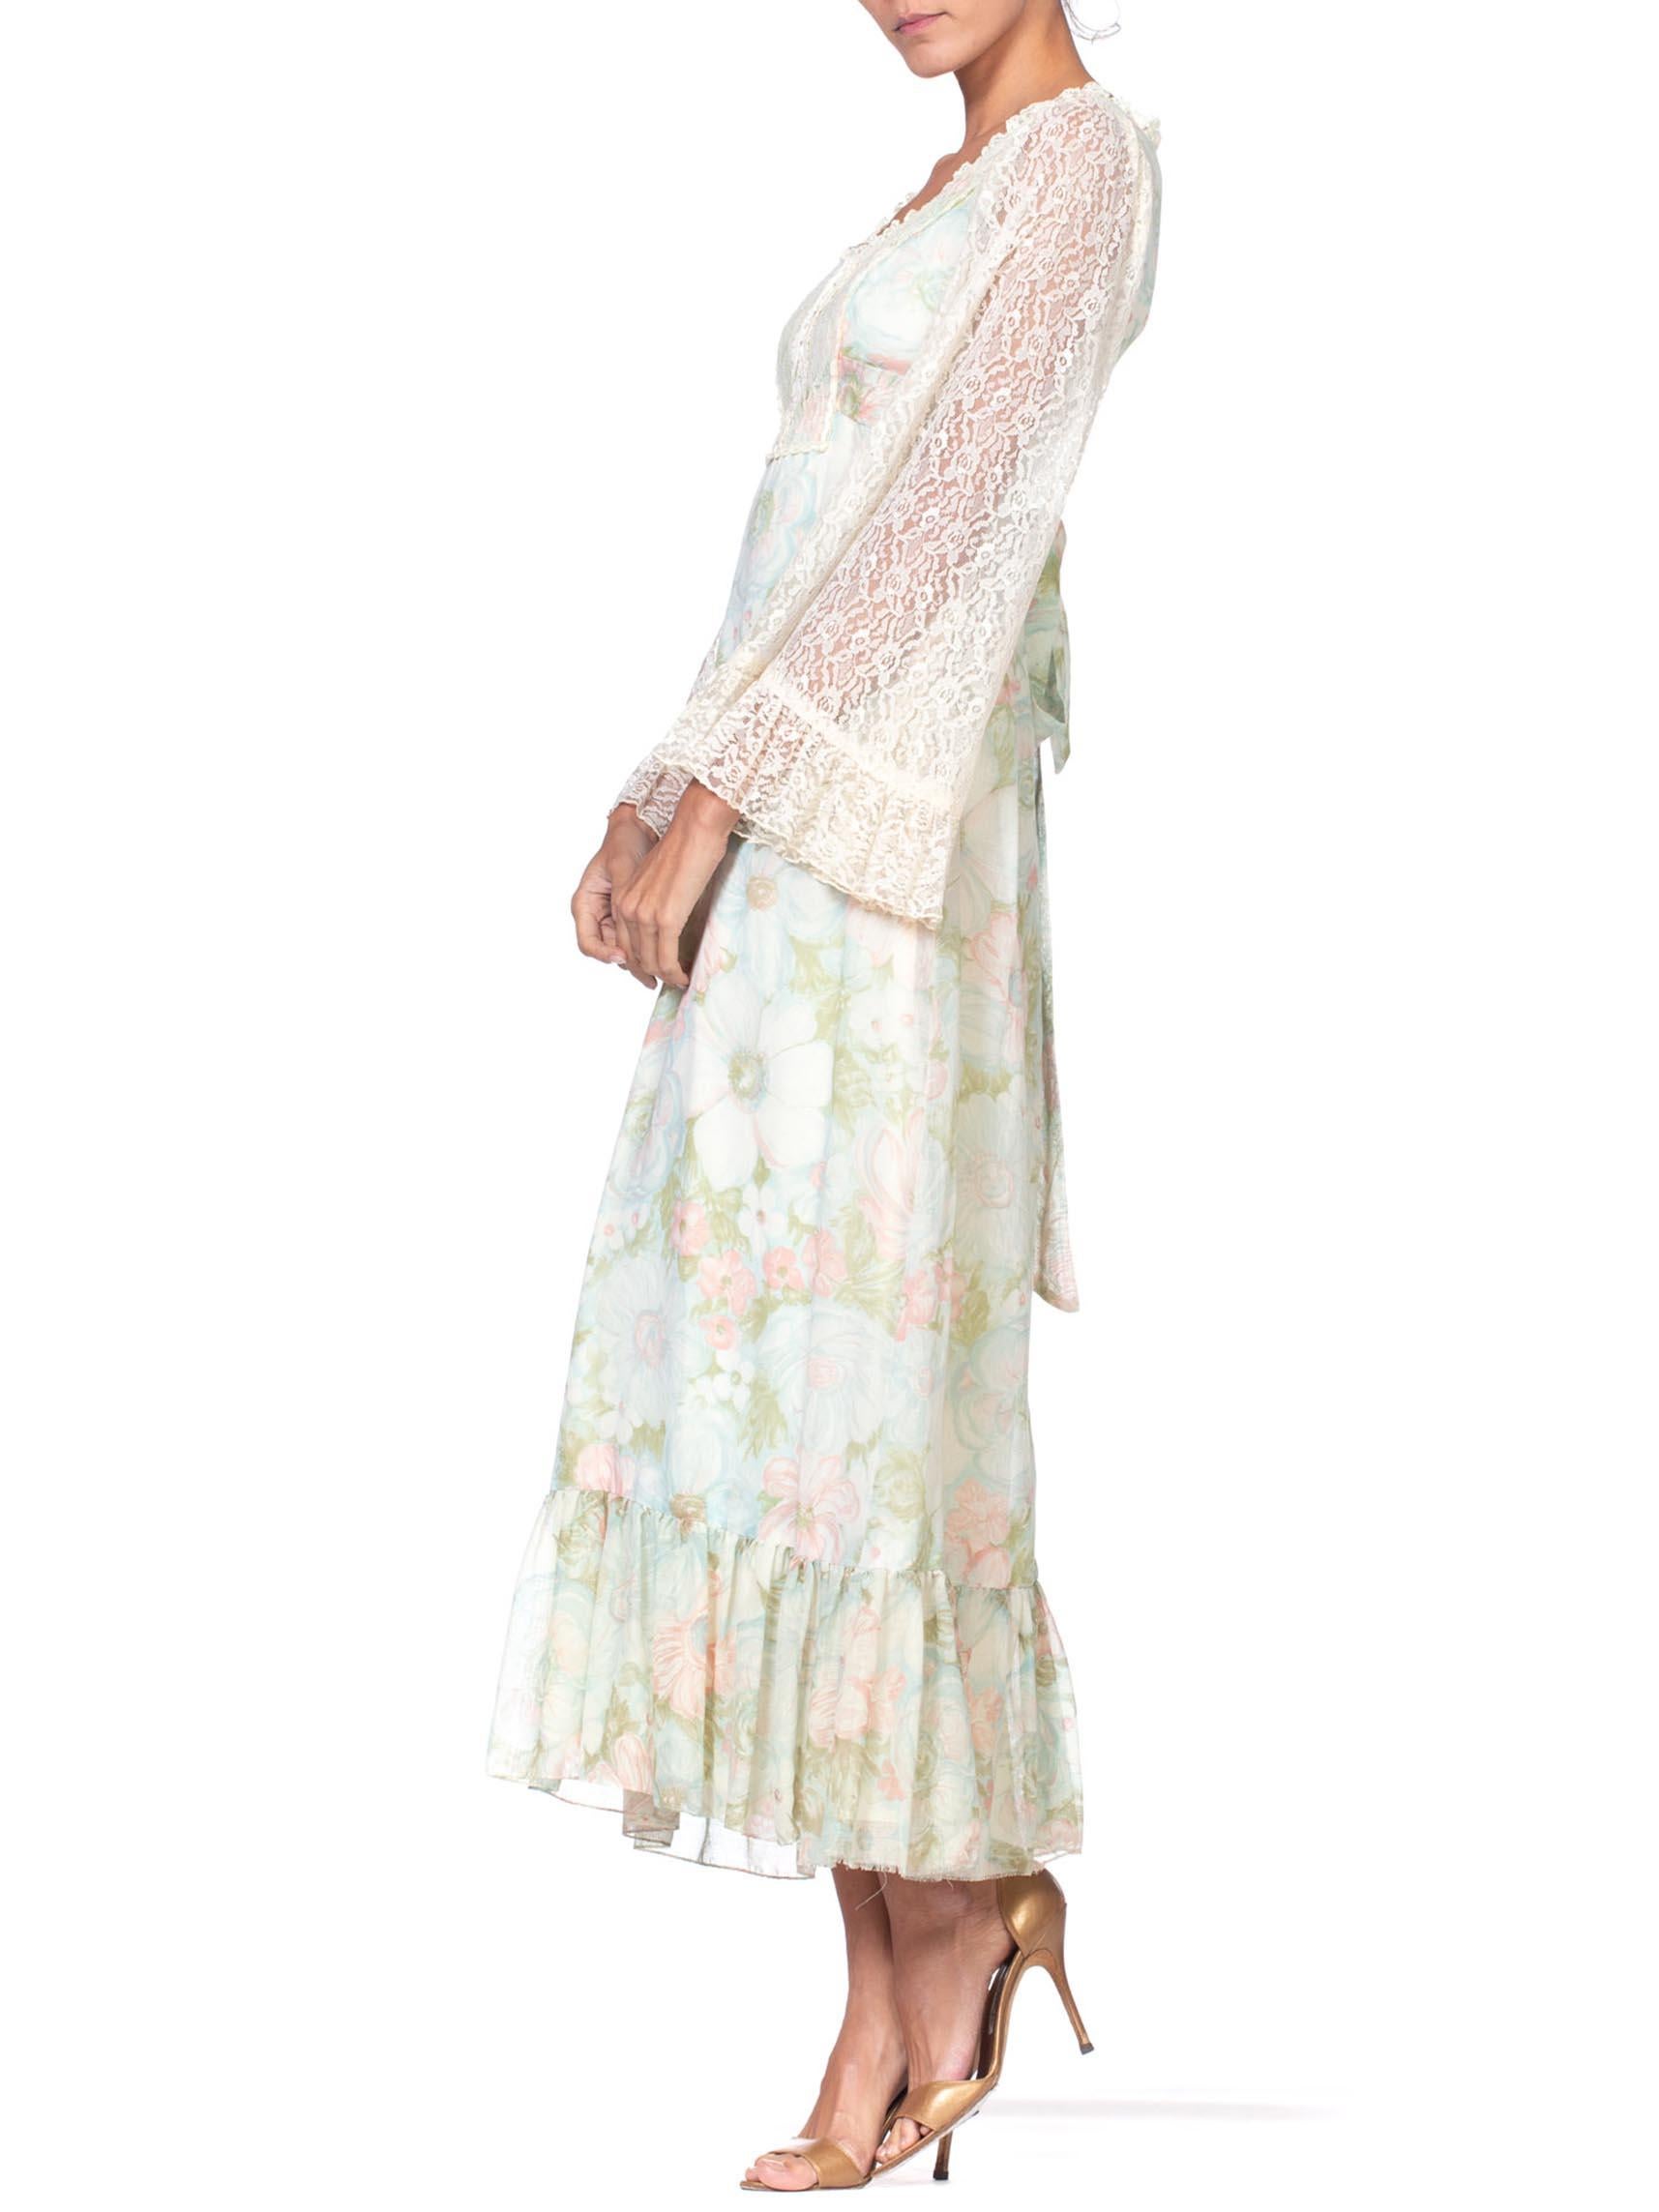 Women's 1970S Boho Floral Printed Cotton Tulle Dress Lined In Silk For Sale